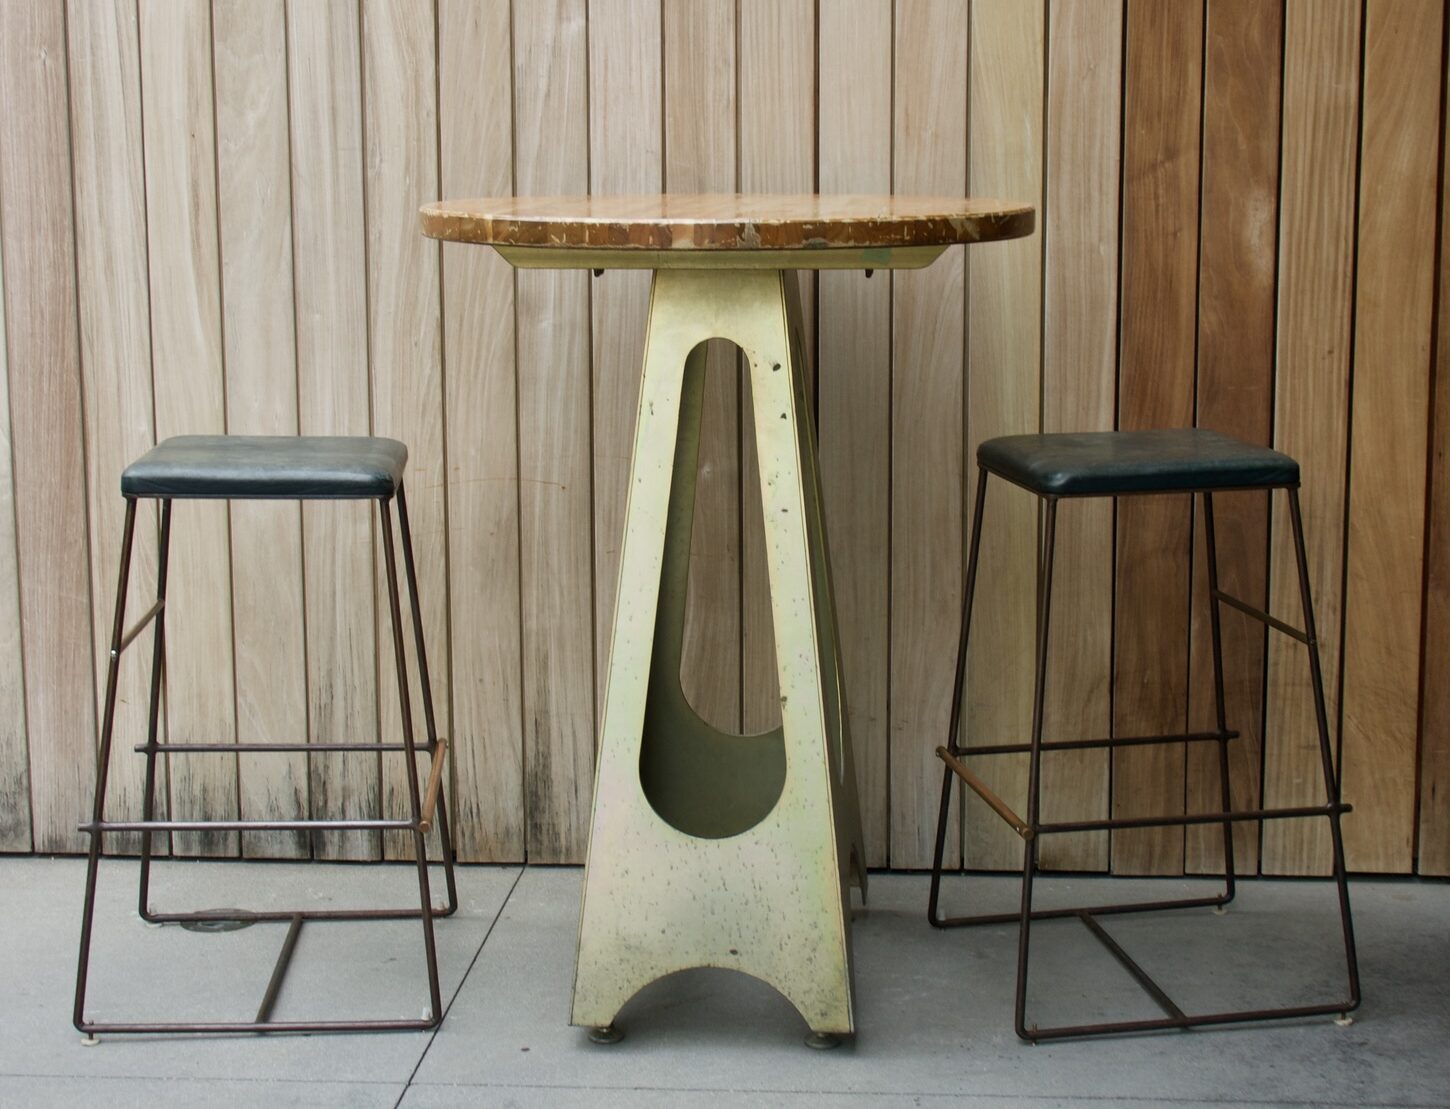 A small high-top dining table with bar stools.